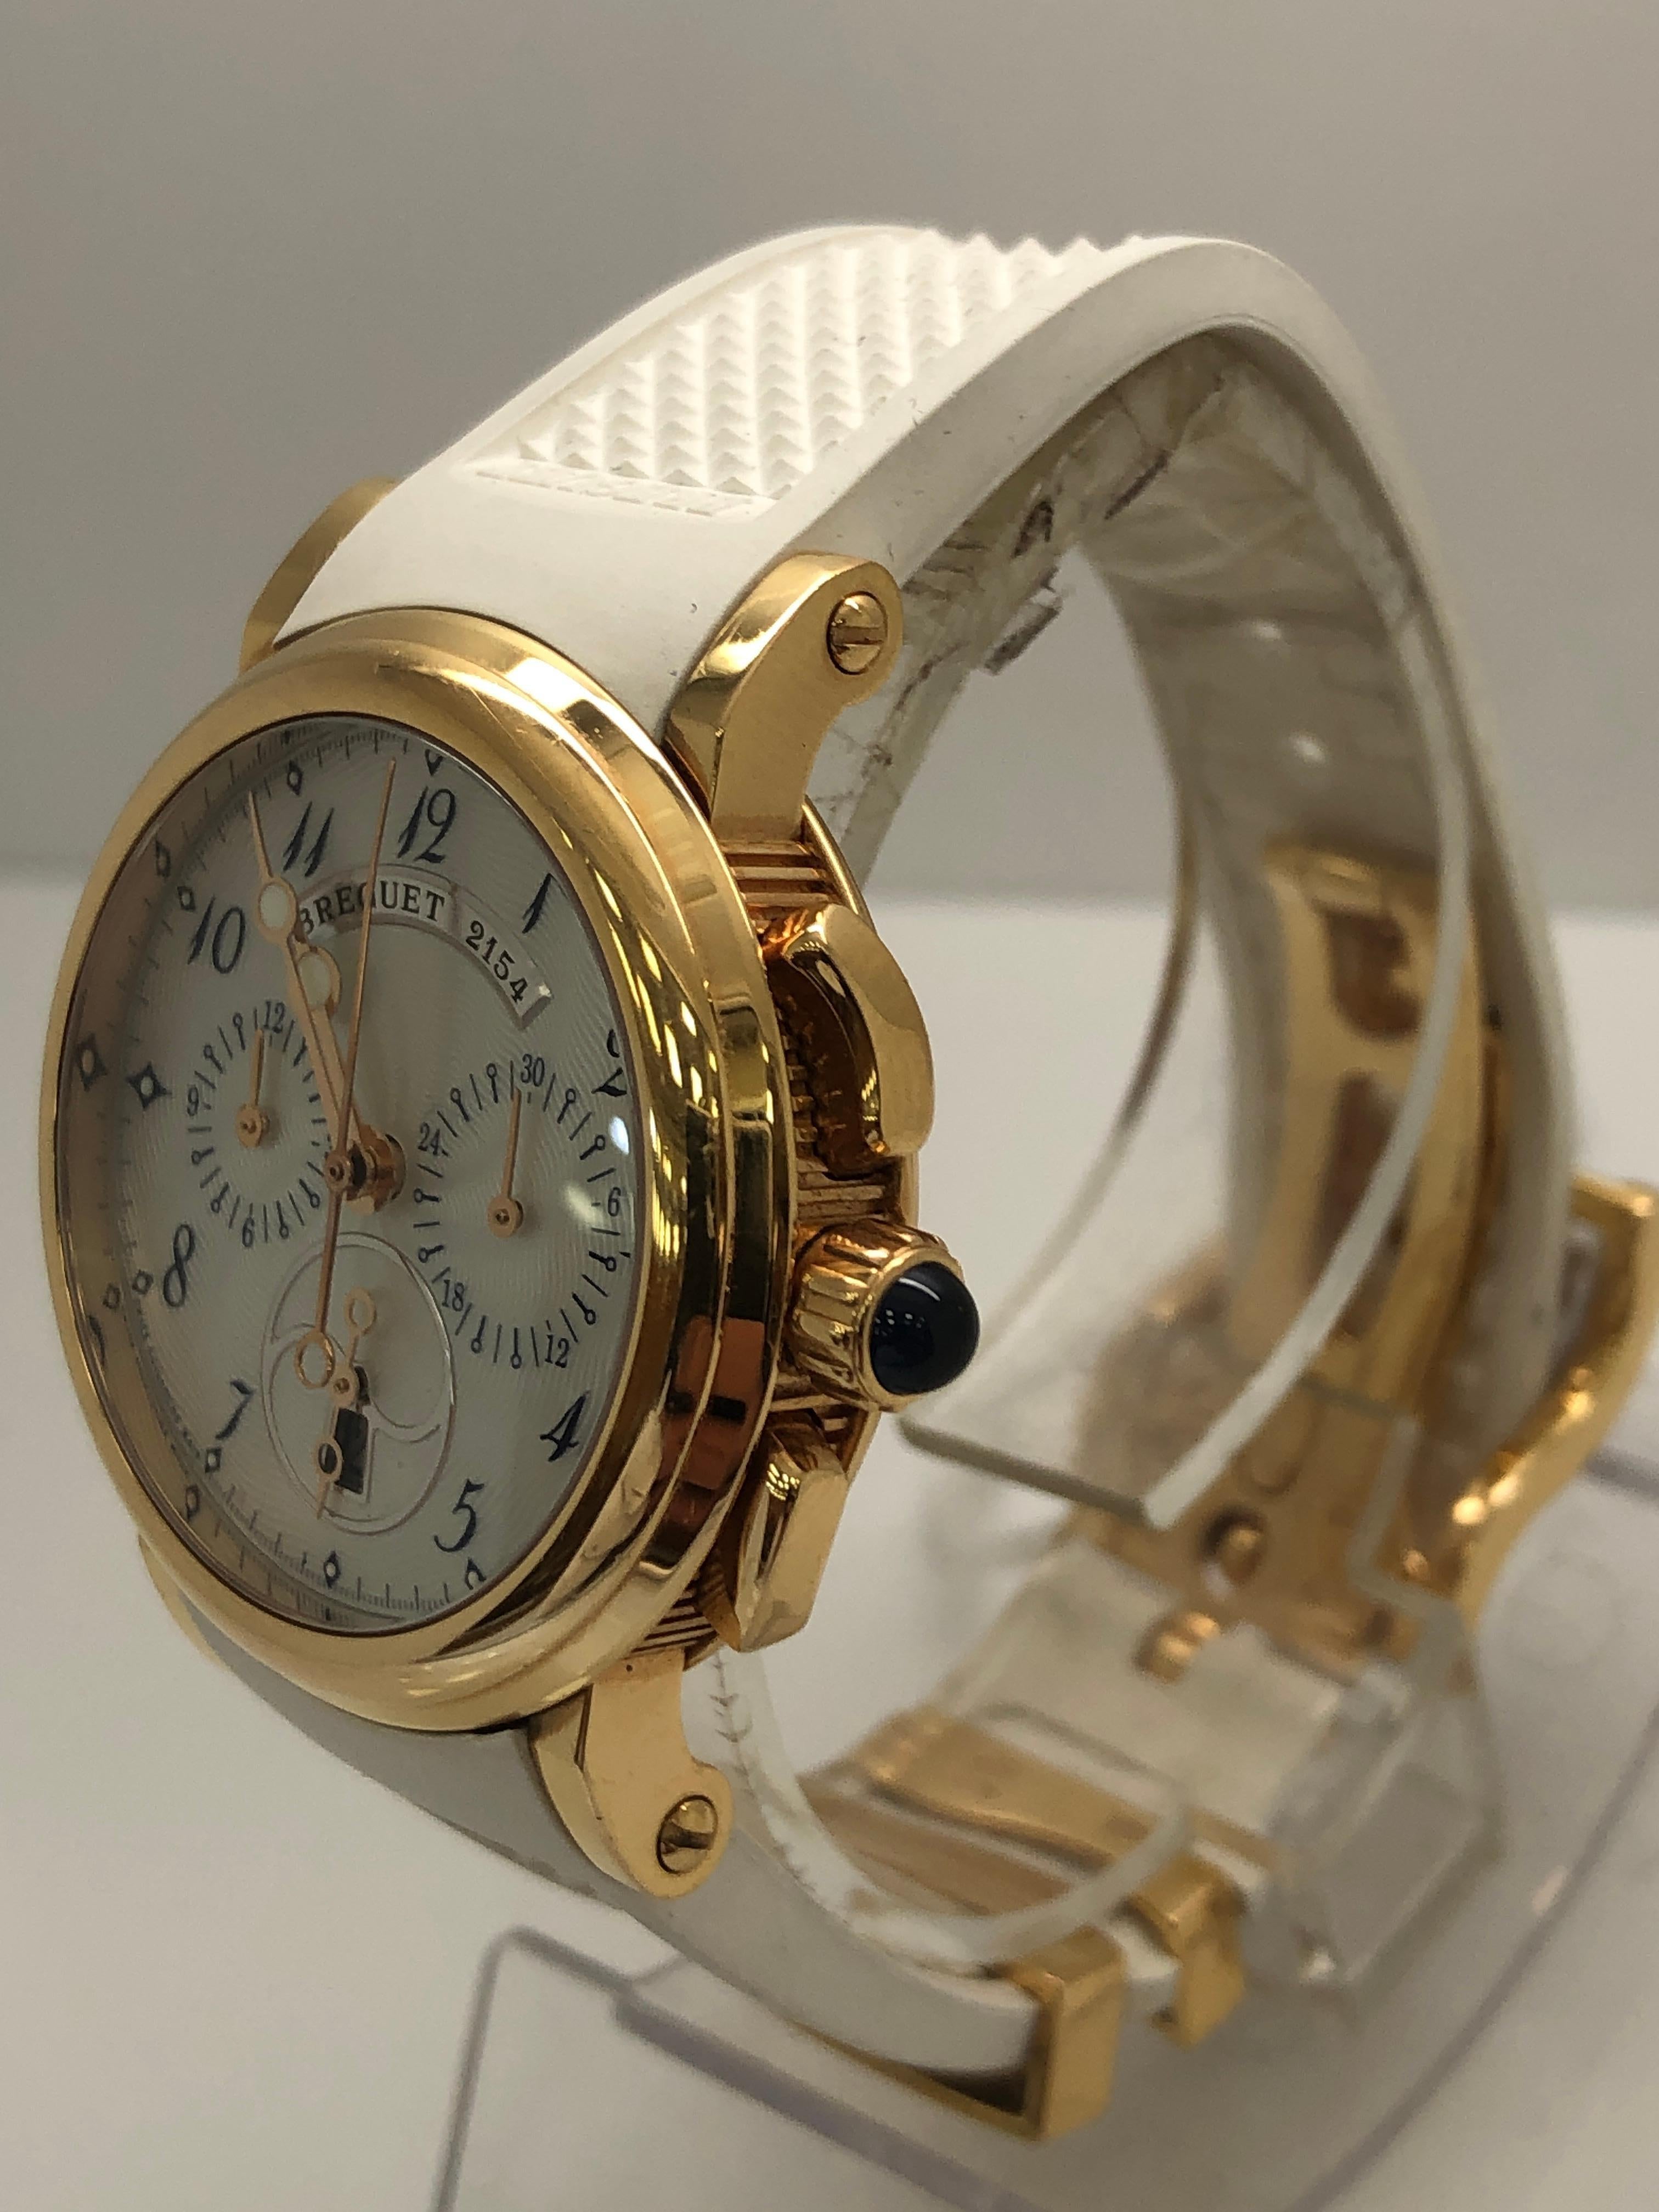 Breguet Marine 18k Gold Ladies Watch New

Mint condition!!

with original box and papers

free overnight shipping 

shop with confidence
